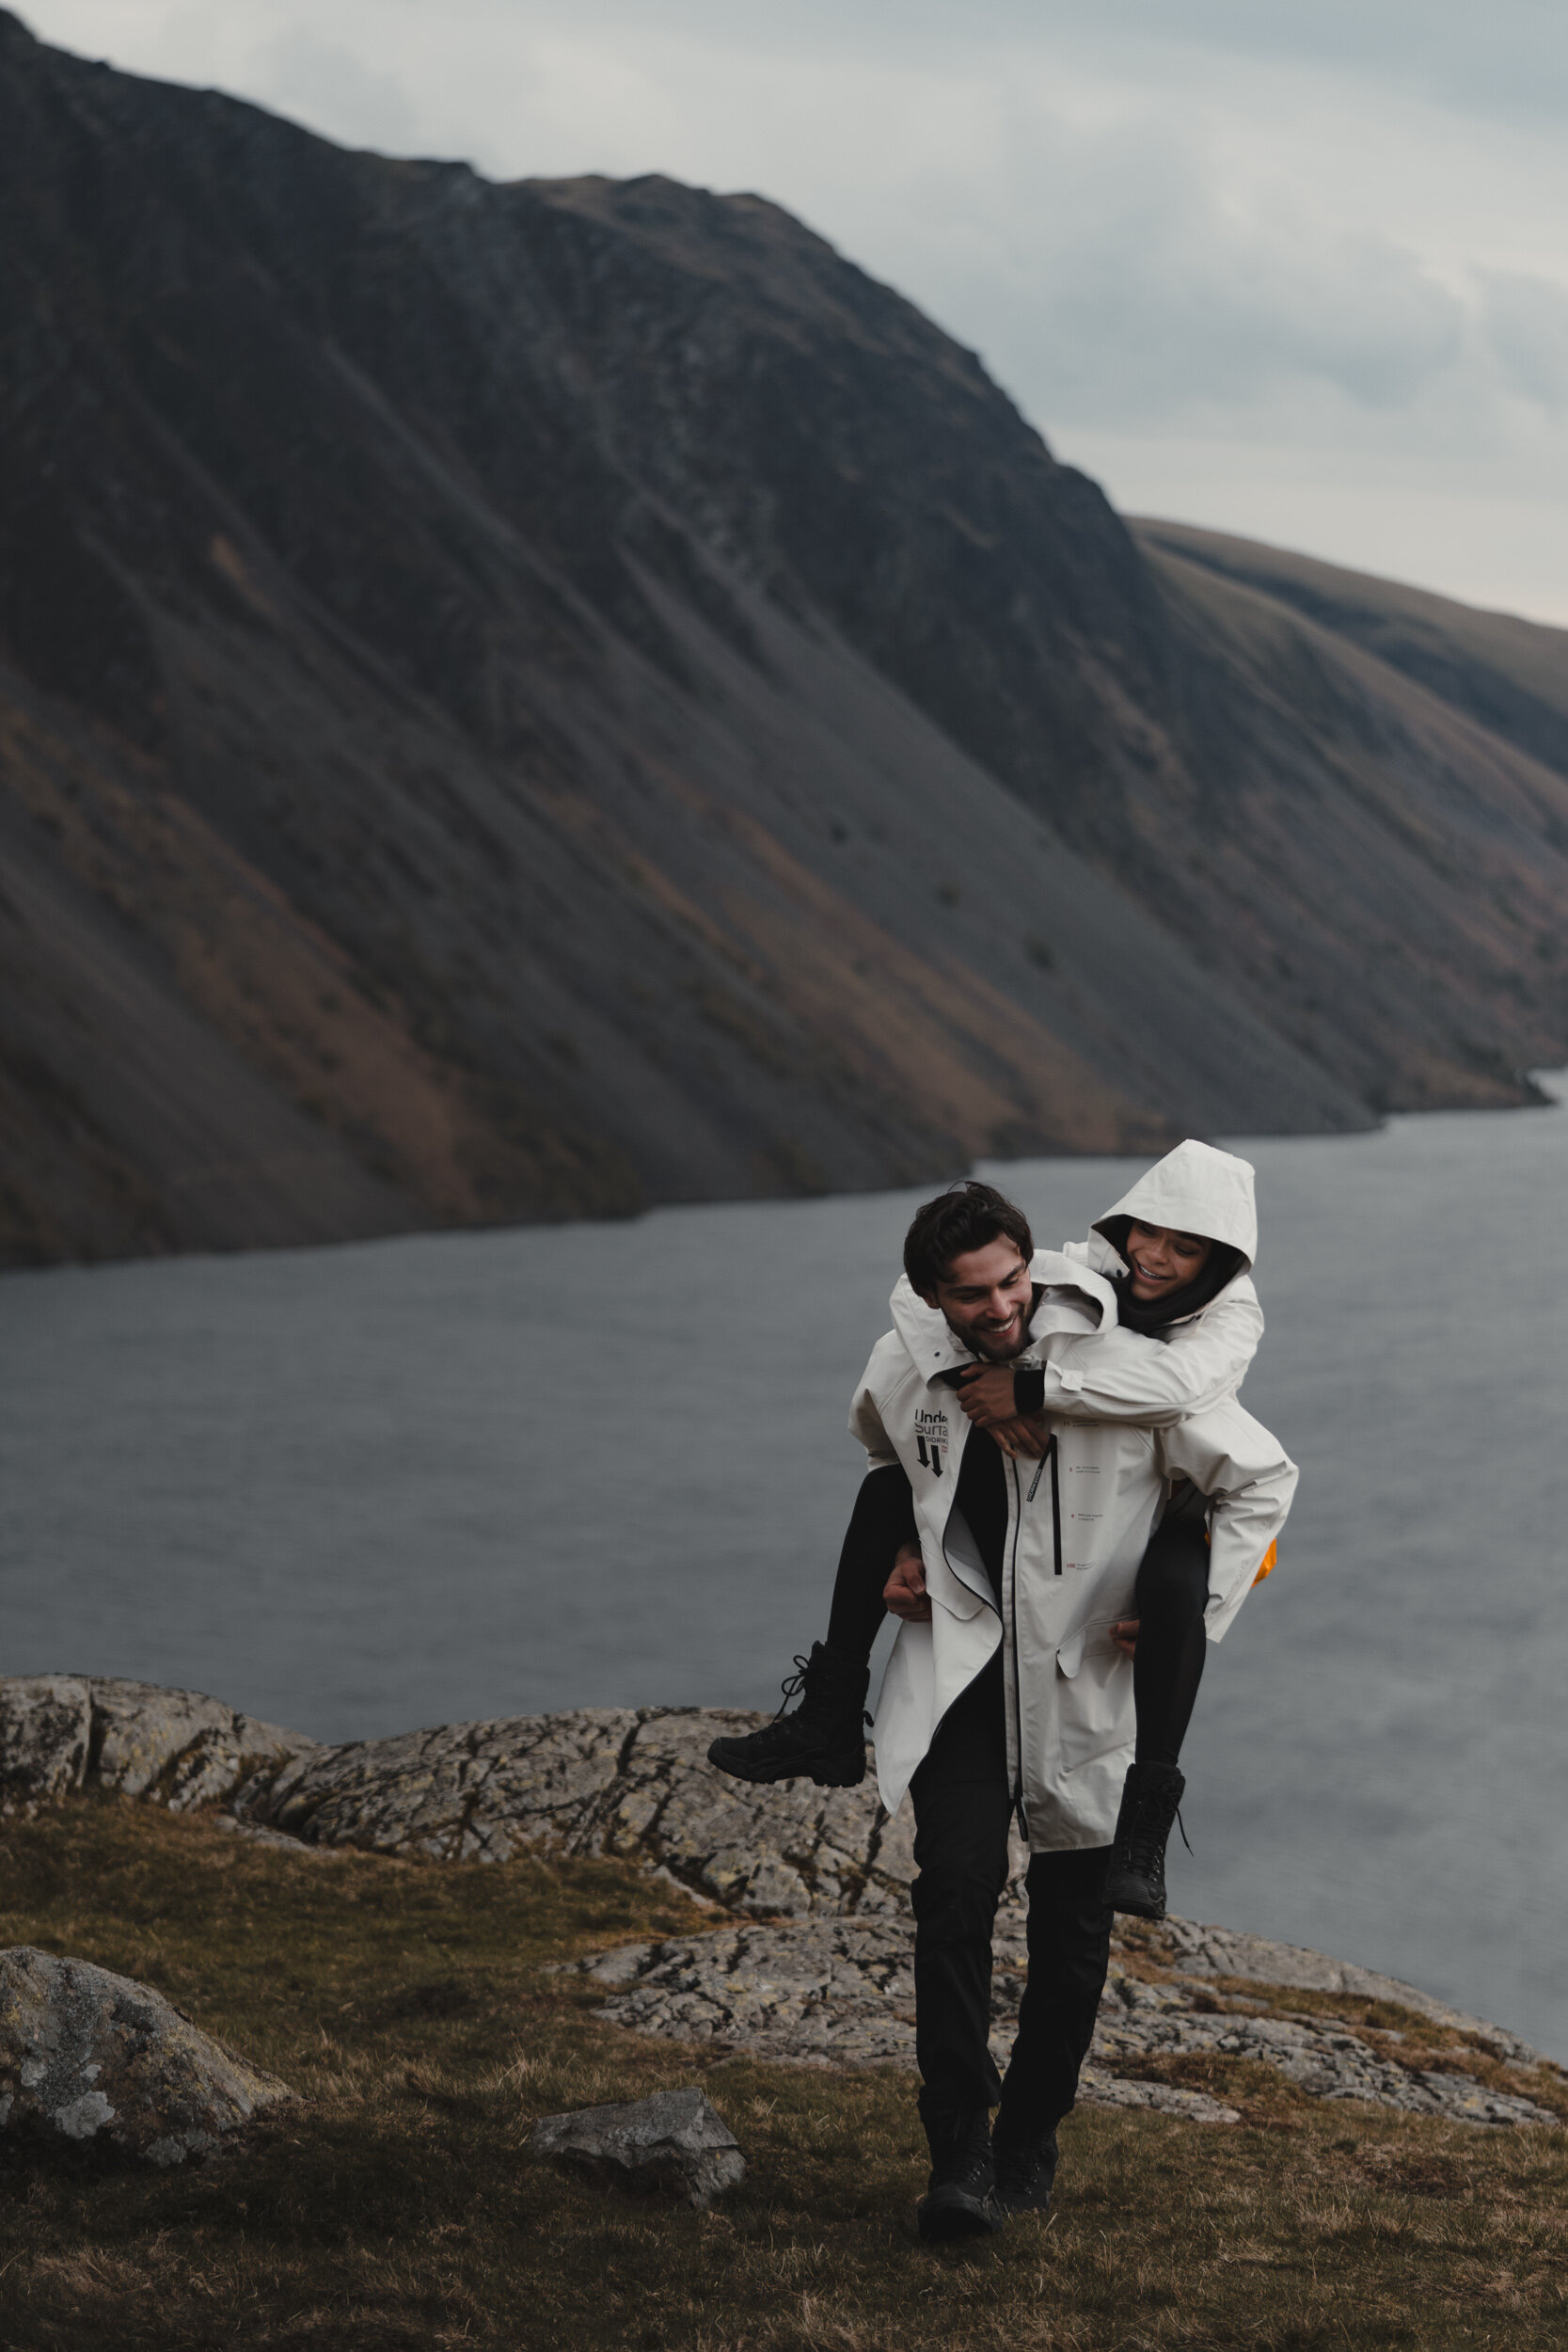 Lifestyle Photographer Alexander Saunes Shoots Didriksons SS21 Line in Lake  District, UK - ENVIZUAL I UK Commercial Photography & Video Production